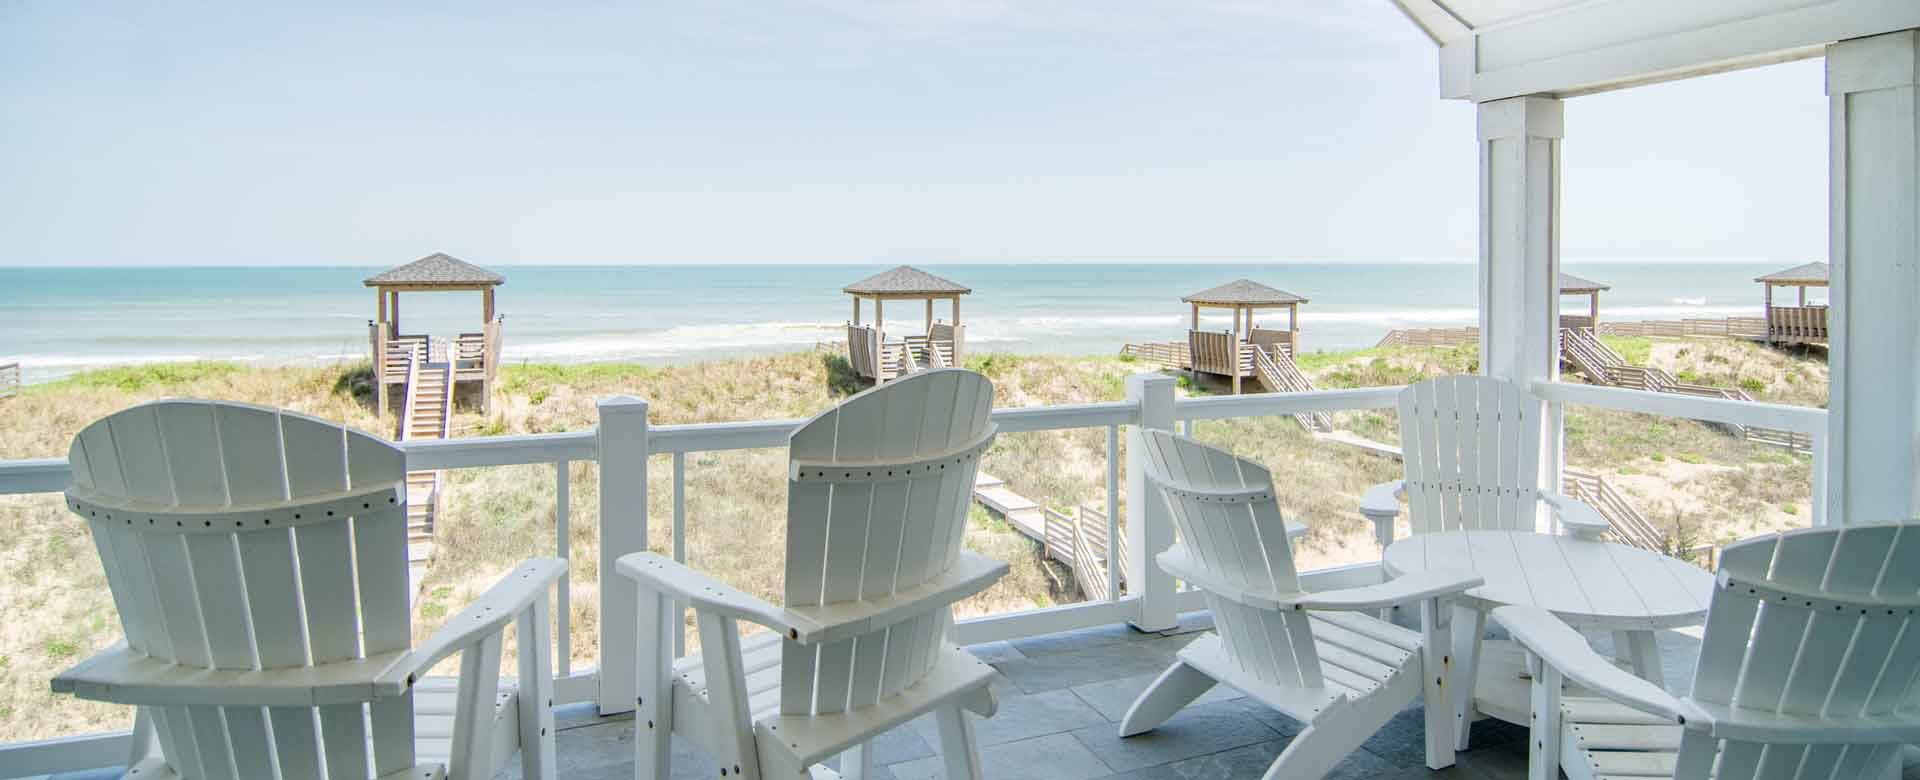 https://www.resortrealty.com/wp-content/uploads/2019/08/outer-banks-oceanfront-vacation-rentals-resort-realty-obx.jpg